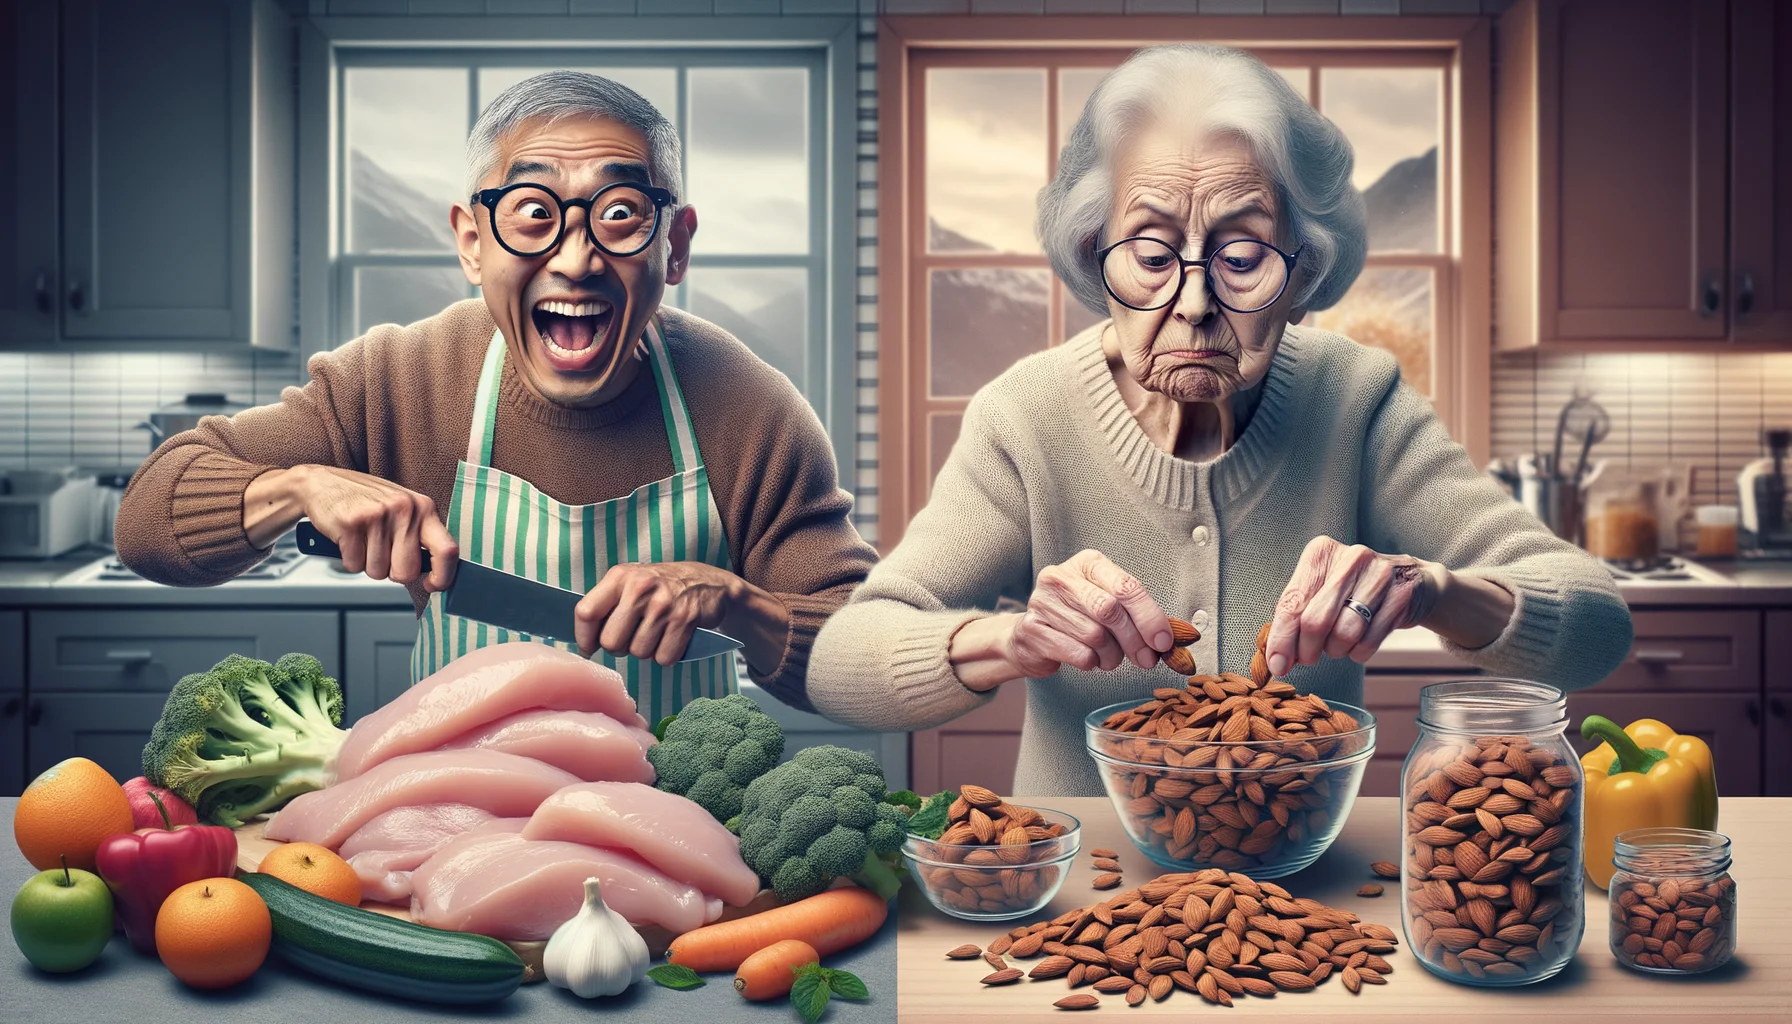 Create a humorously exaggerated image capturing the essence of the leangains meal plan with an elderly angle. Imagine two different scenarios. On the one side of the image, an enthusiastic and active elderly South Asian man preparing pounds of chicken breast, steamed vegetables, and oodles of brown rice, his kitchen counters completely overrun. On the other side, a bemused elderly Caucasian woman meticulously counting out almonds, her spectacles perched on her nose. It's a funny contrast that clearly showcases the feast-famine cycle inherent to leangains and the unique challenges encountered by seniors on diets.